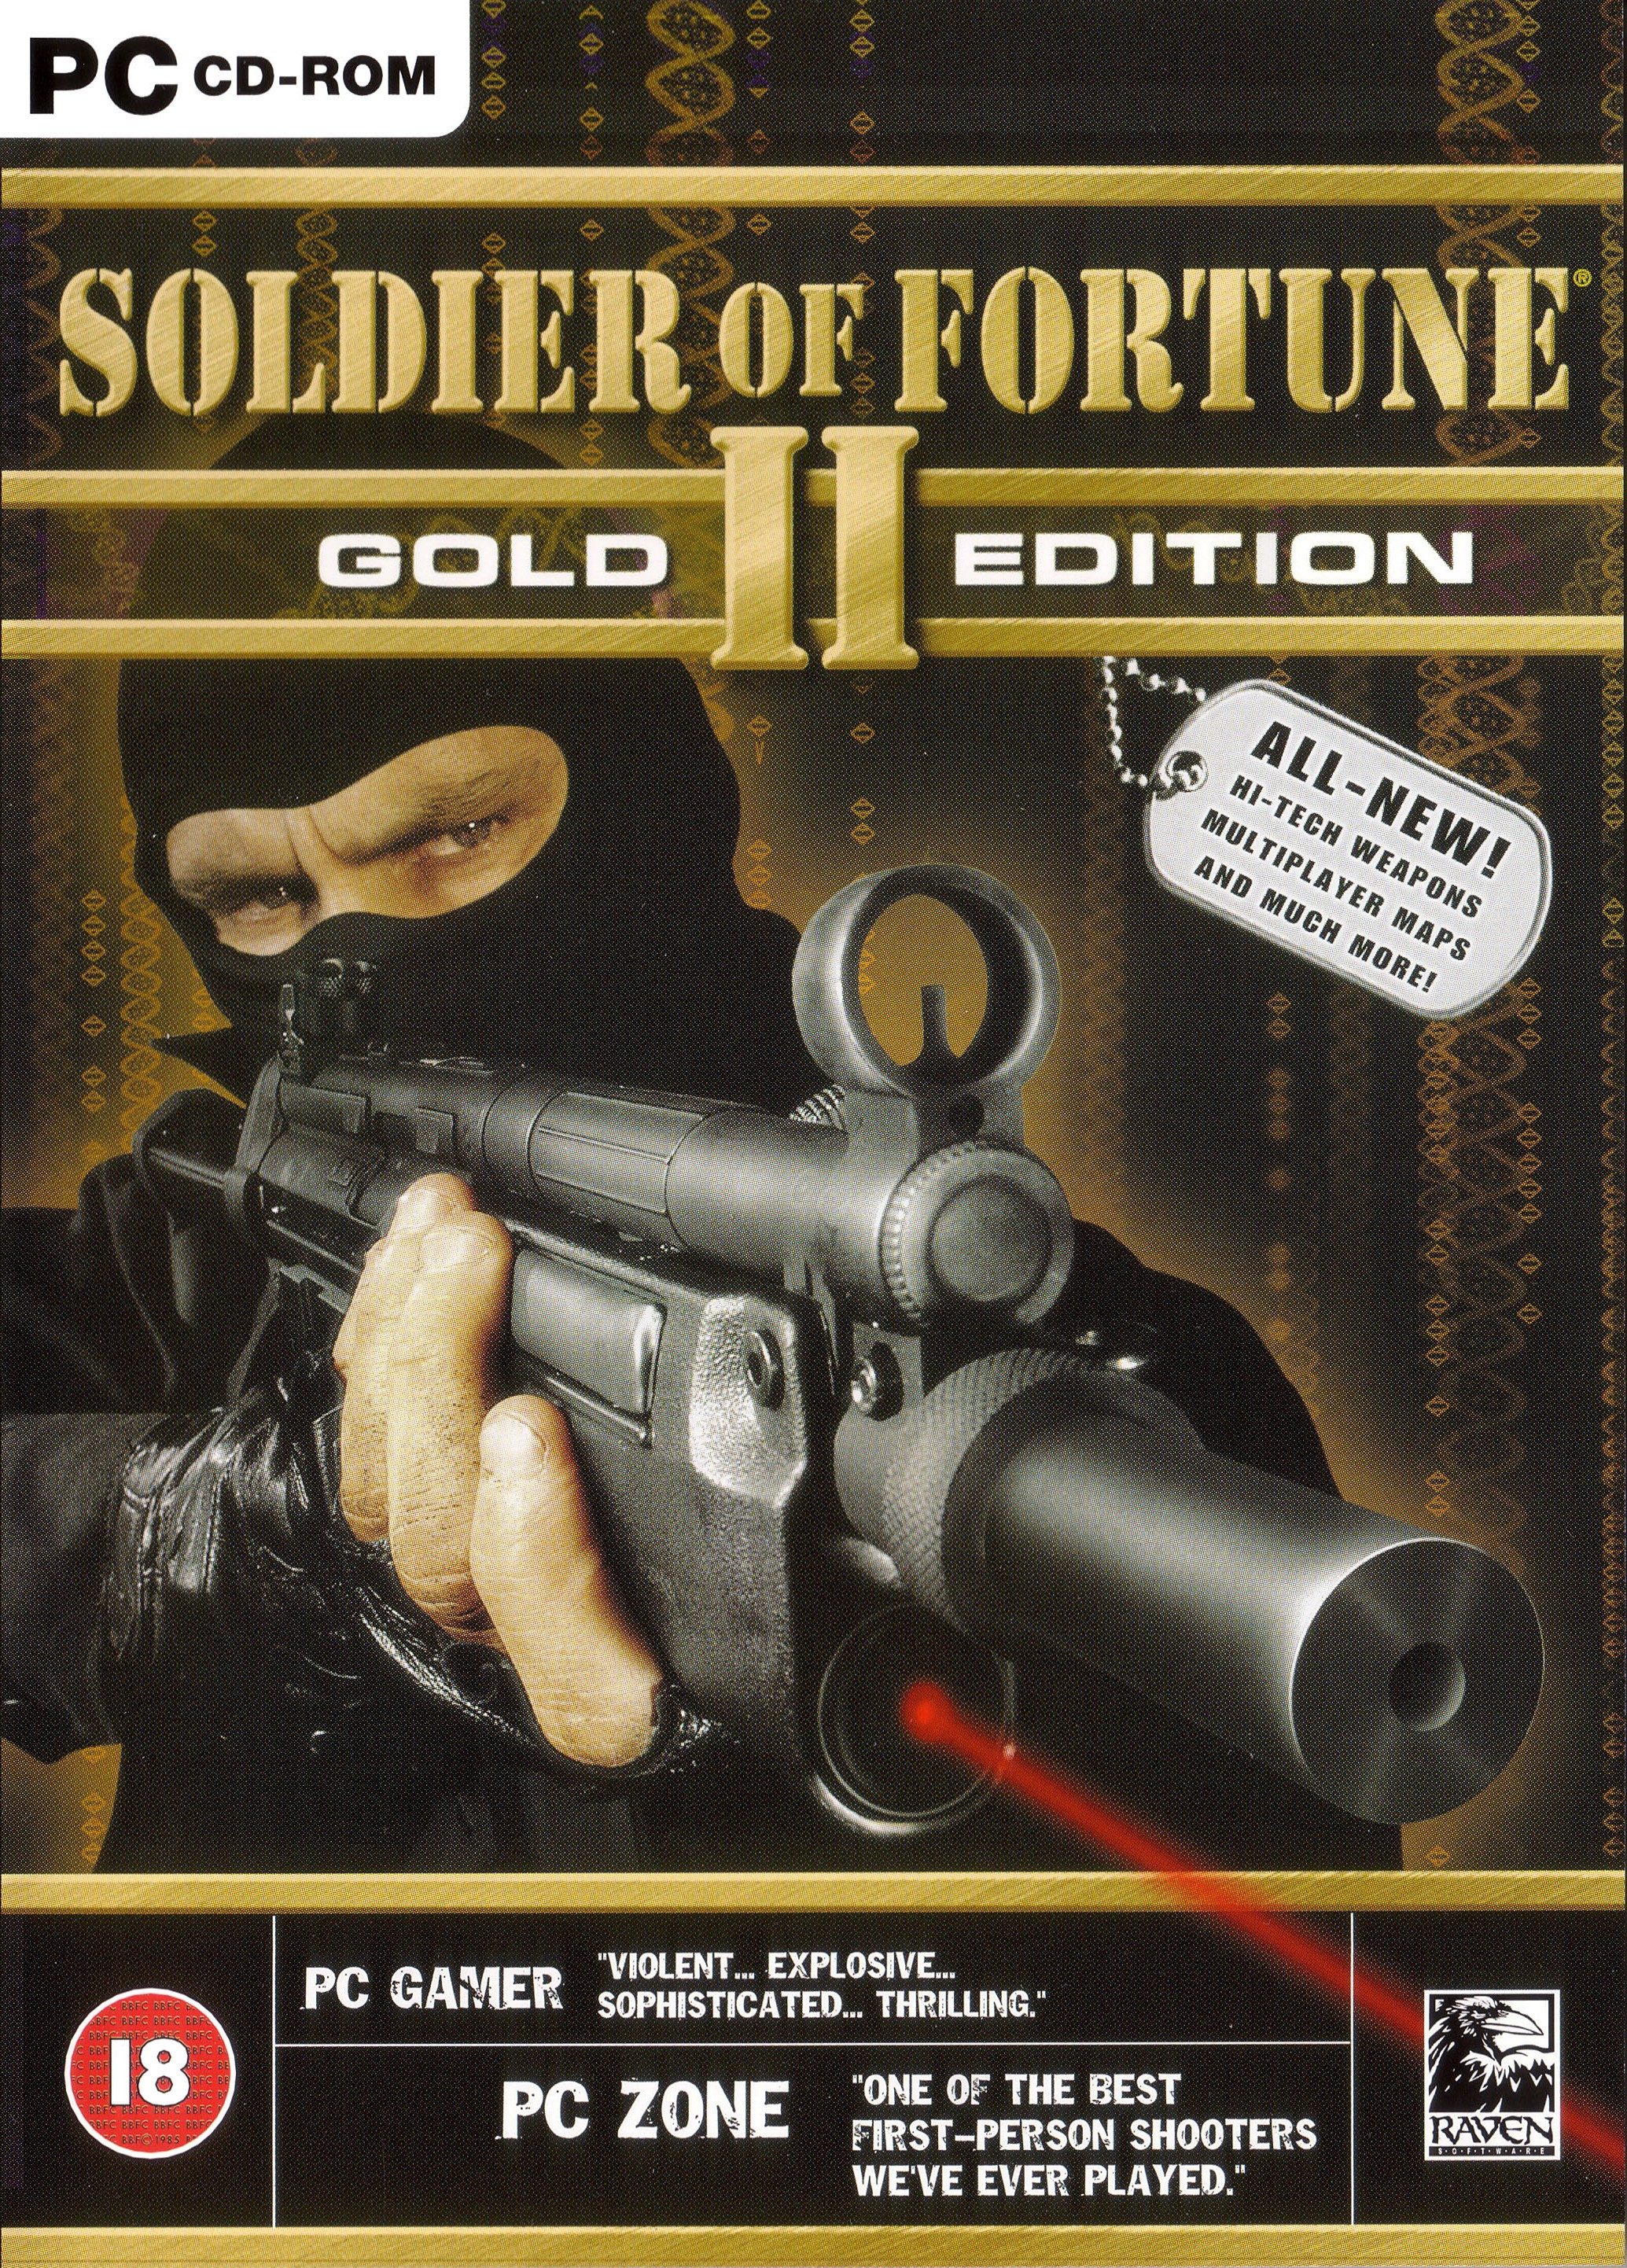 soldier of fortune 2 double helix free game